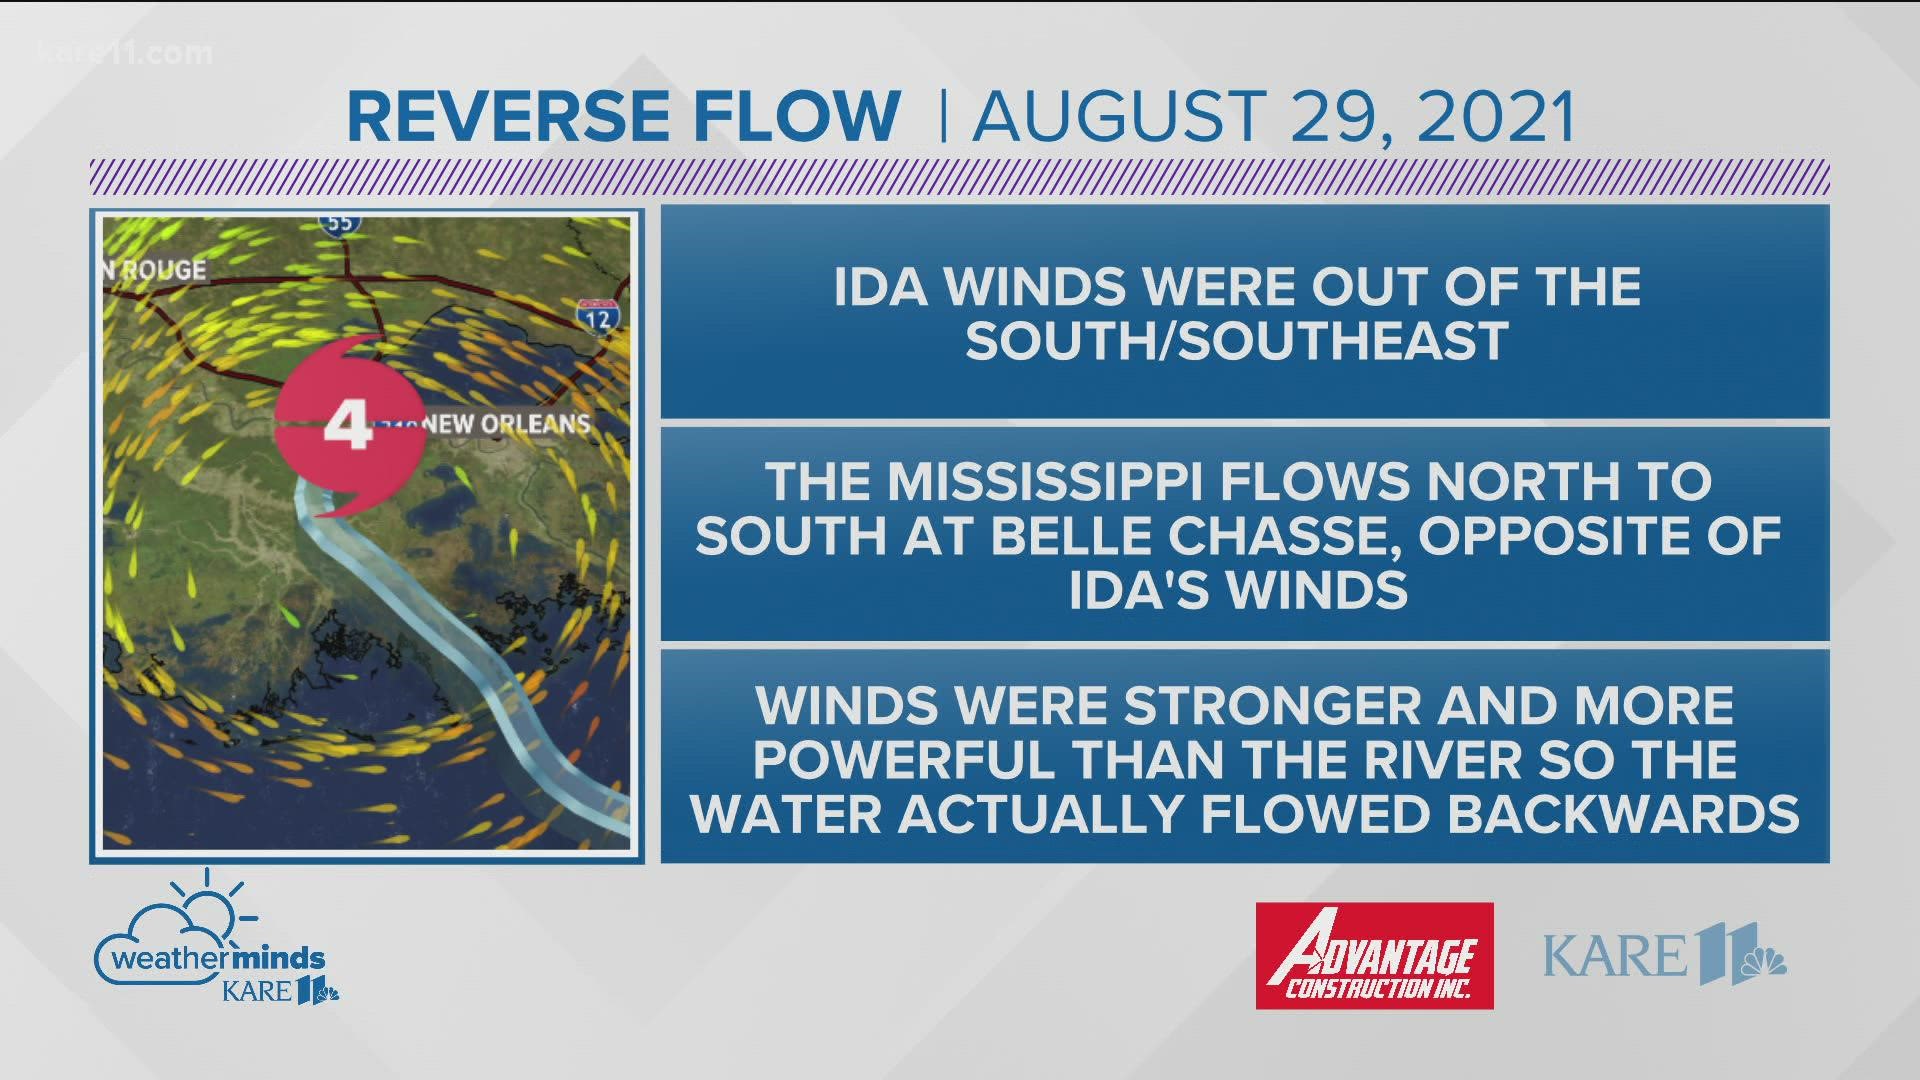 Powerful winds pushed the water inland and temporarily reversed the flow in a section of the river. This also happened during Hurricane Isaac and Hurricane Katrina.